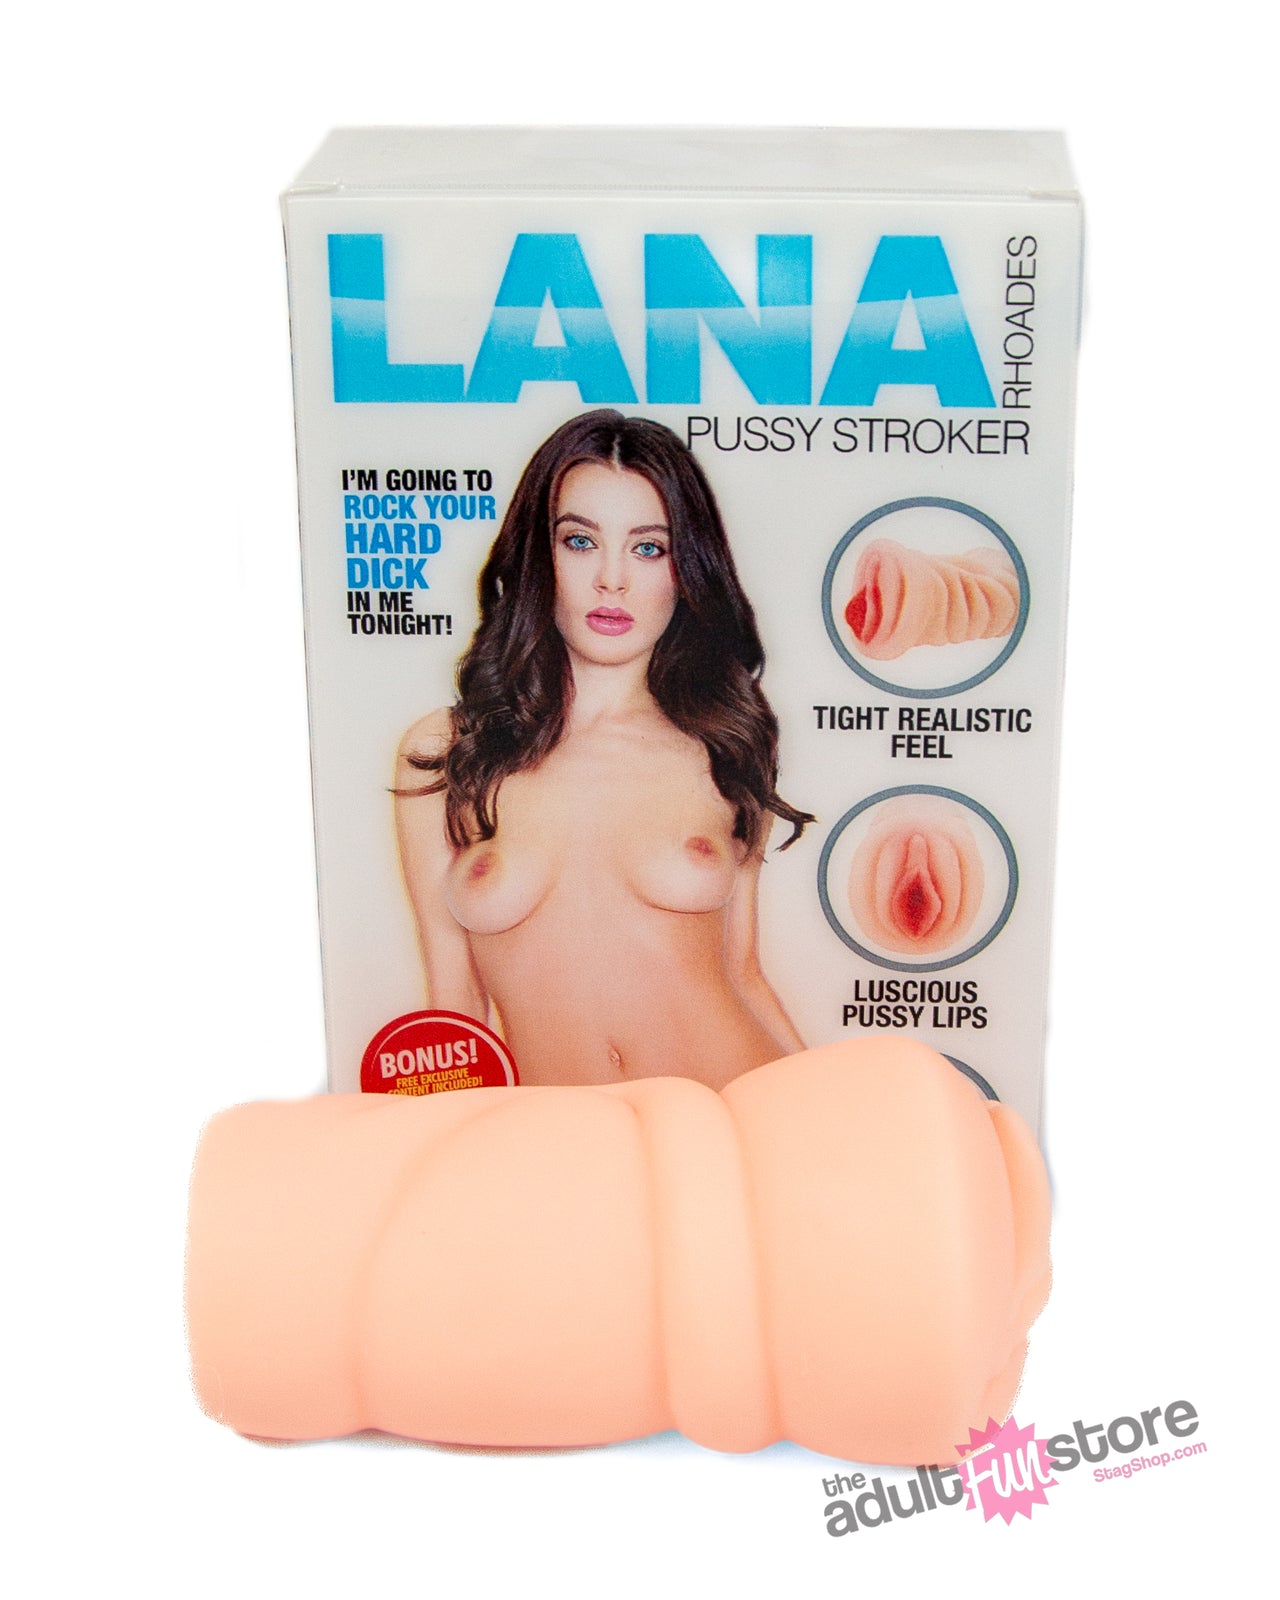 Cousins Group - Lana Rhoades Pussy Stroker - Beige - Stag Shop